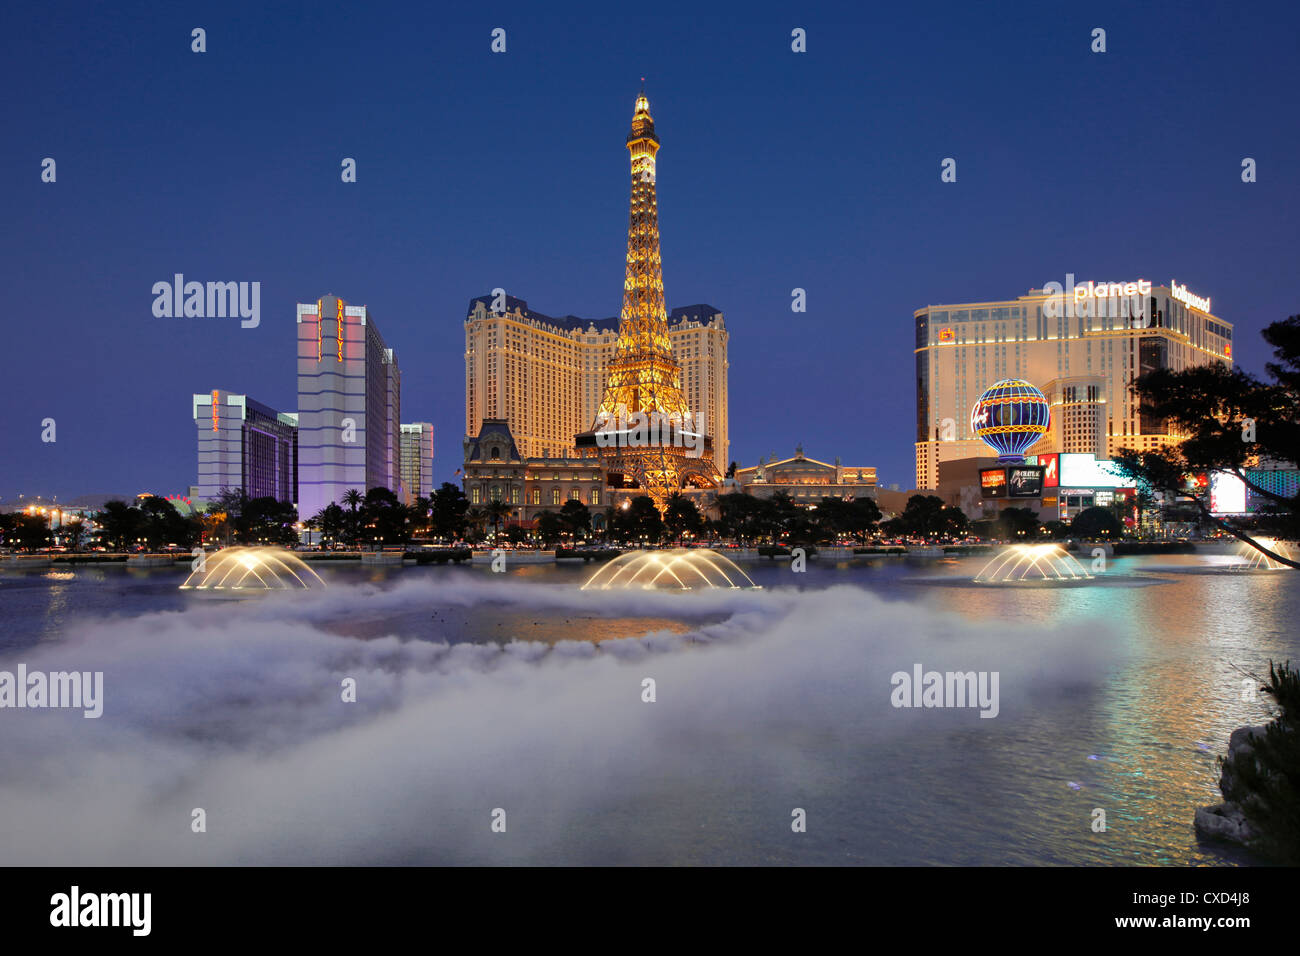 Bellagio fountains perform in front of the Eiffel Tower replica, Las Vegas, Nevada, United States of America, North America Stock Photo